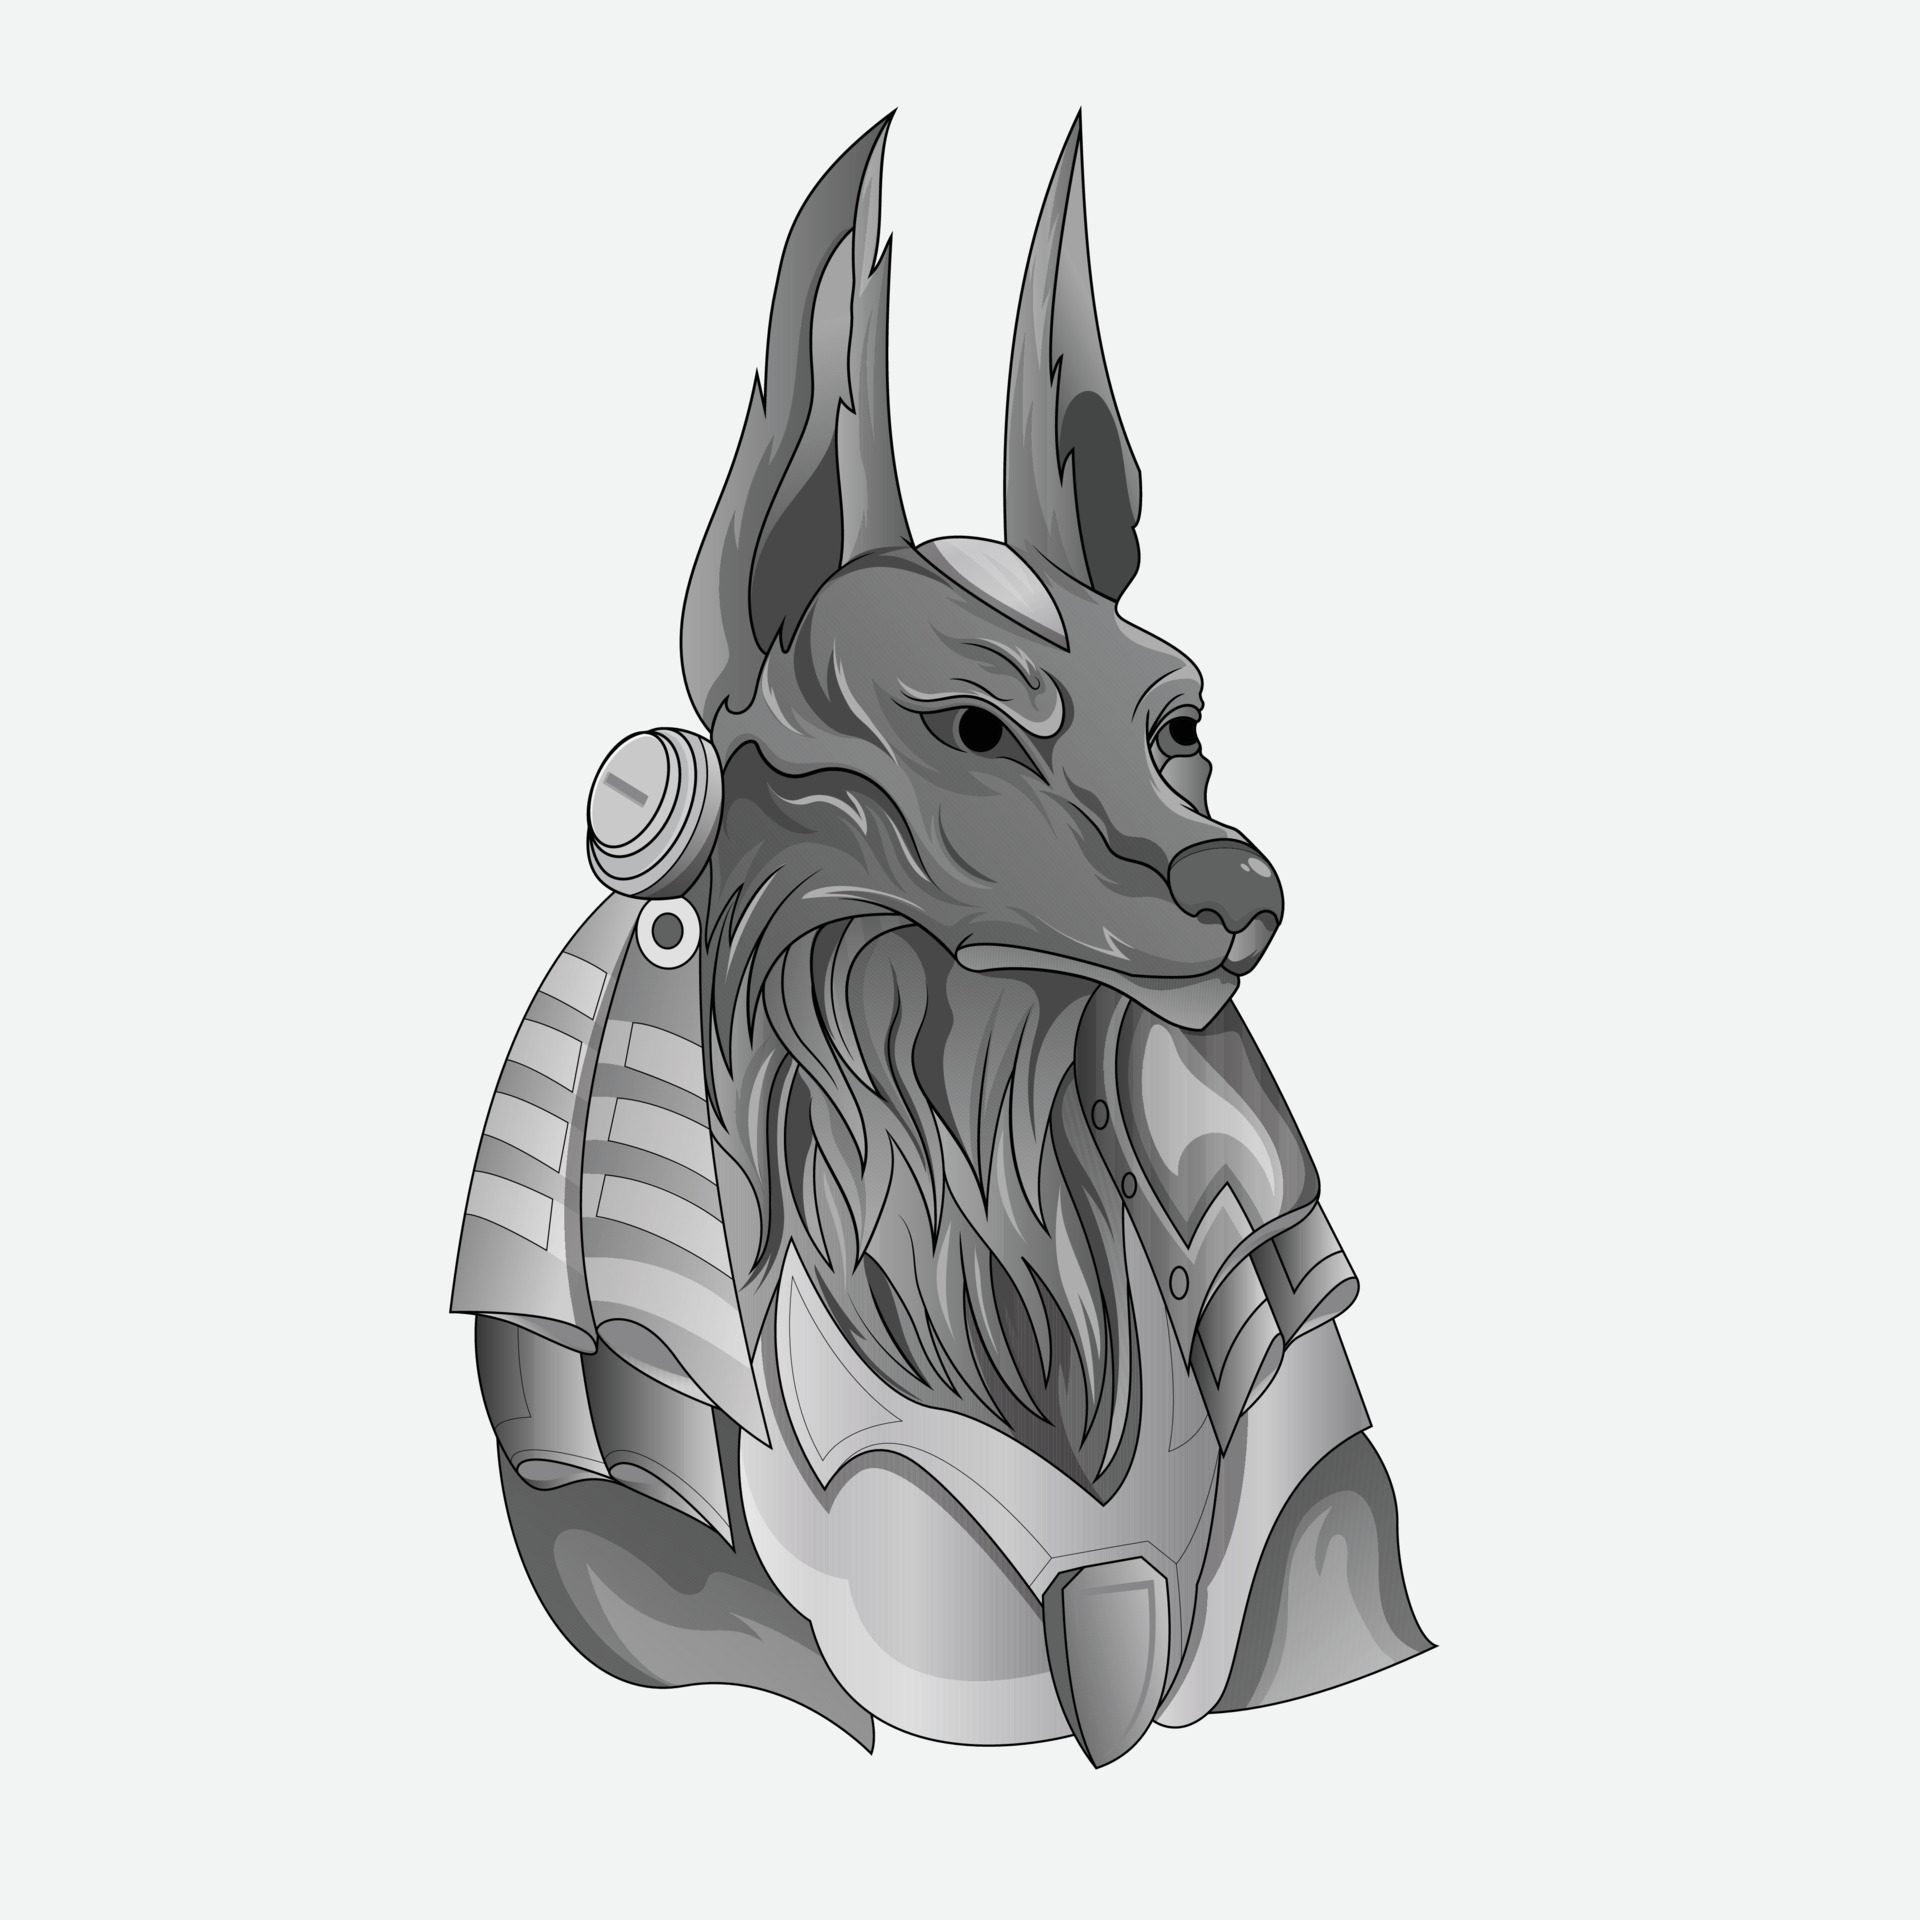 Anubis the god of deathAnd what it represents in the symbolism of tattoos  Egyptian mythology  Steemit